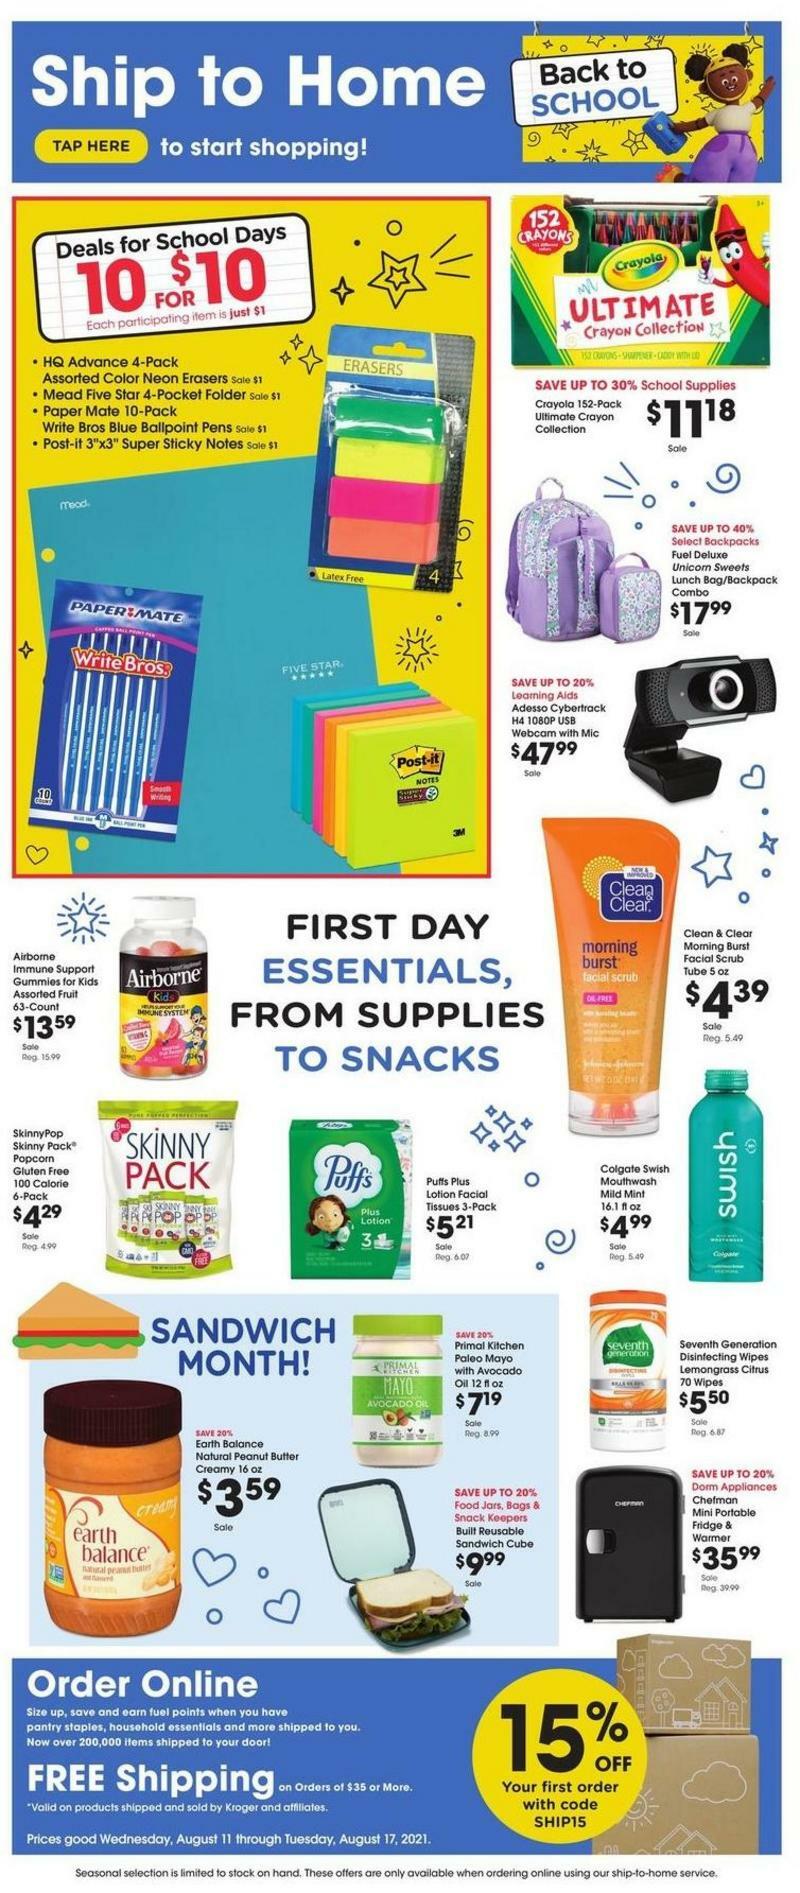 City Market Ship to Home Weekly Ad from August 11